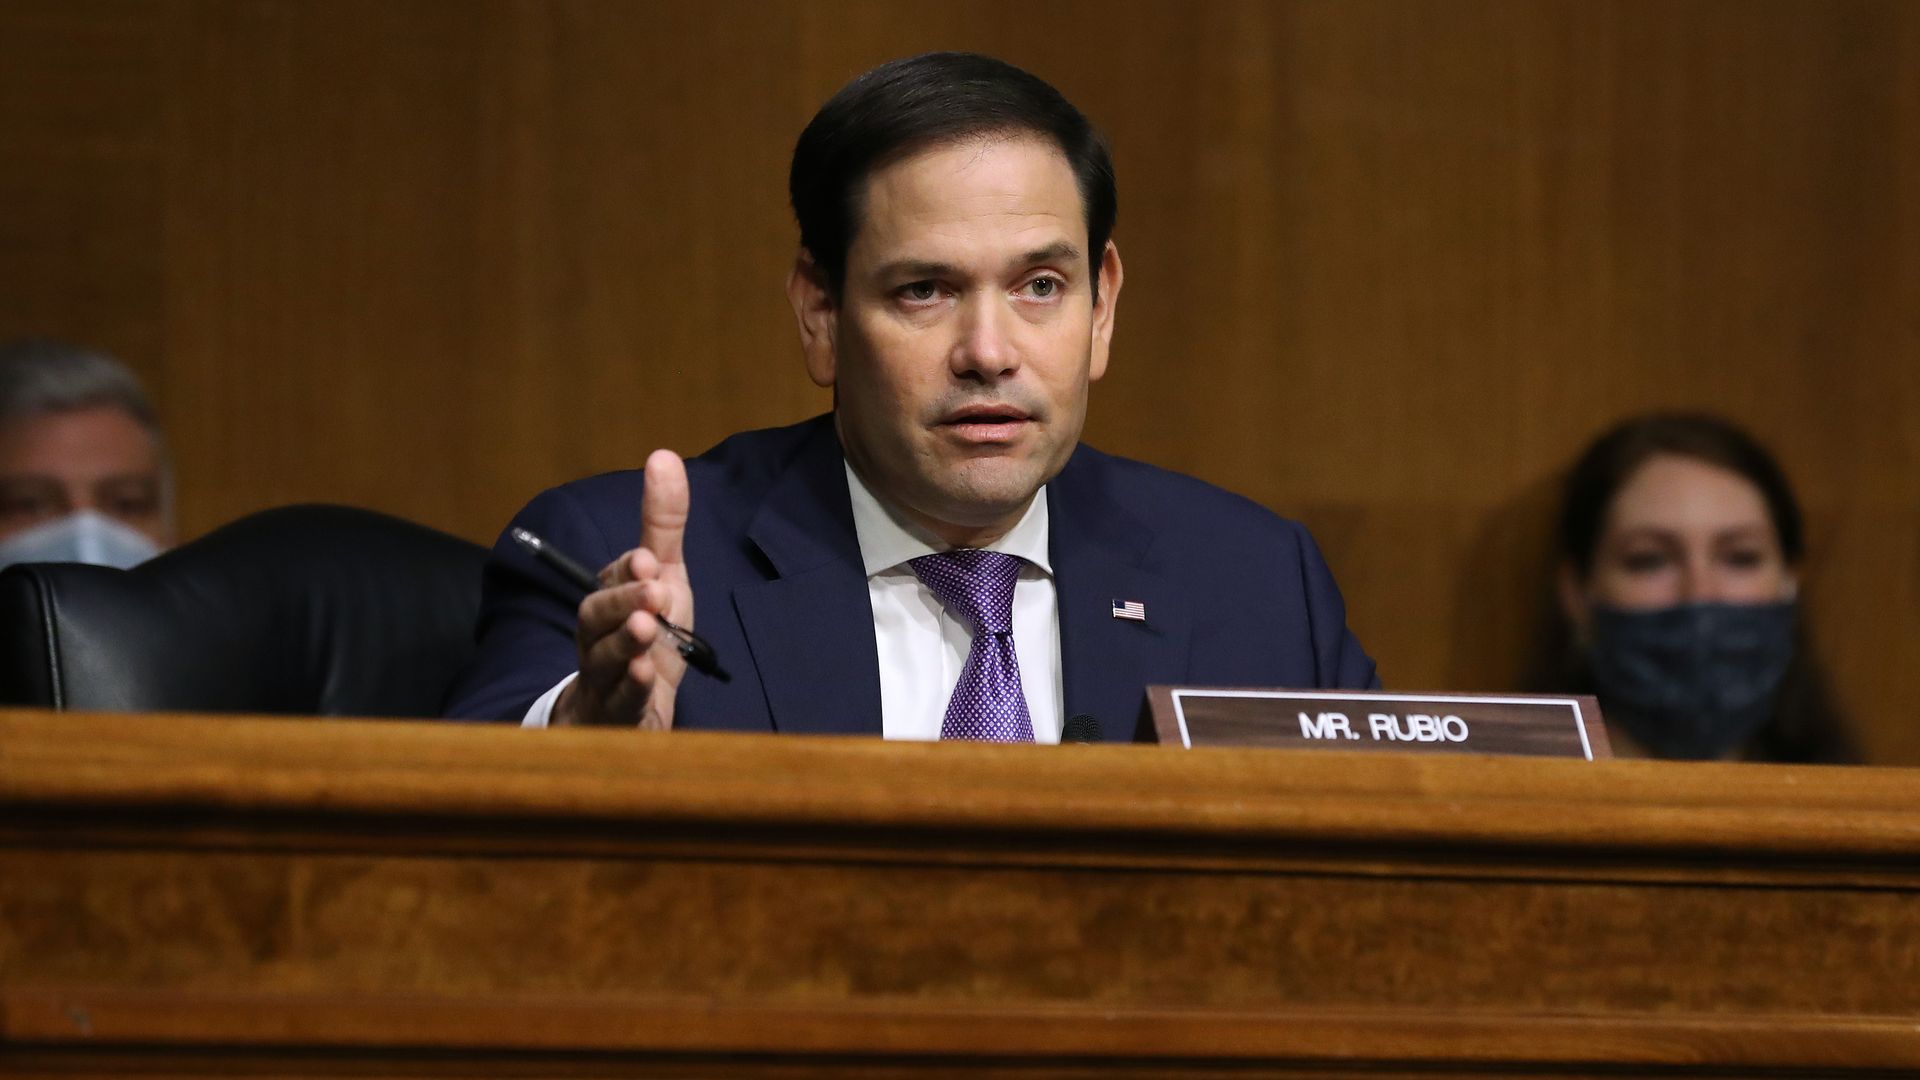  Senate Foreign Relations Committee member Sen. Marco Rubio (R-FL)  during a hearing   on Capitol Hill August 04